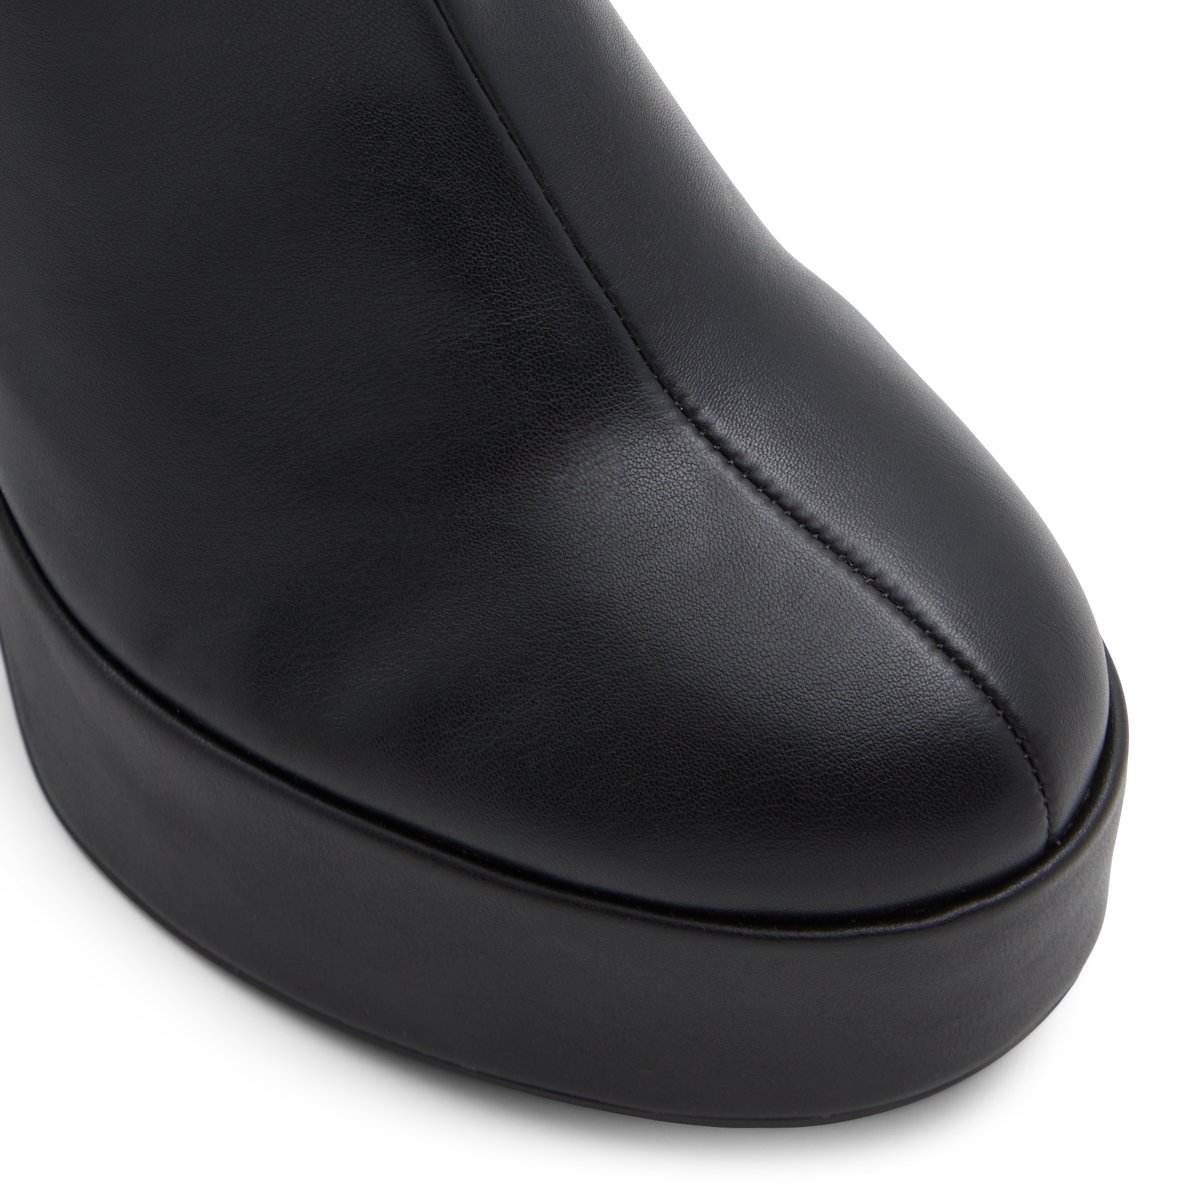 Aila Black Women's Ankle Boots | Call It Spring Canada